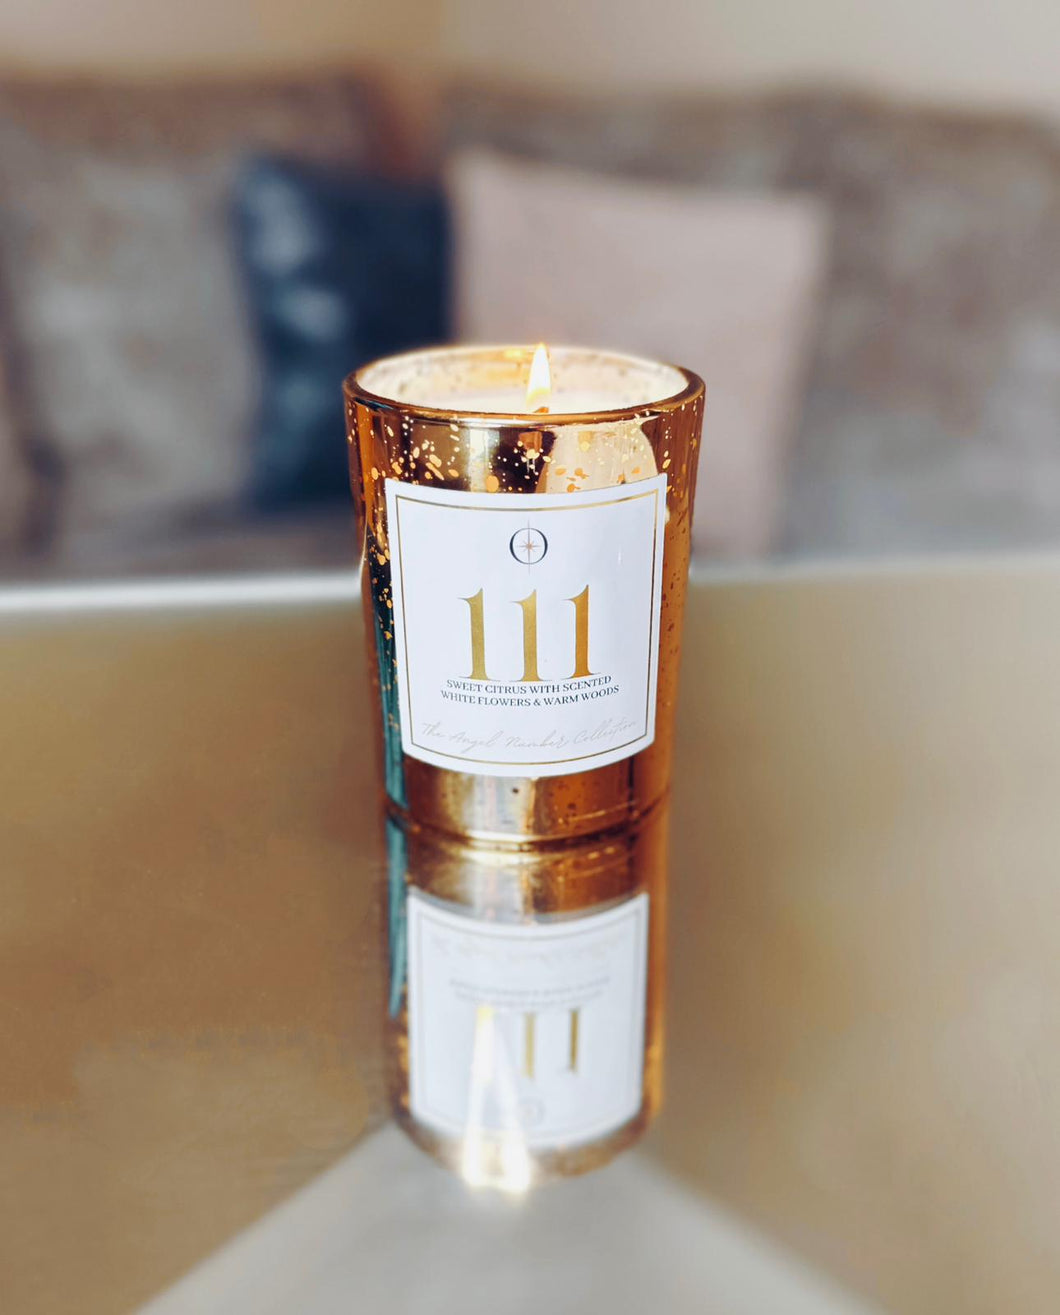 '111' Angel Number Candle - The Angel Number Collection